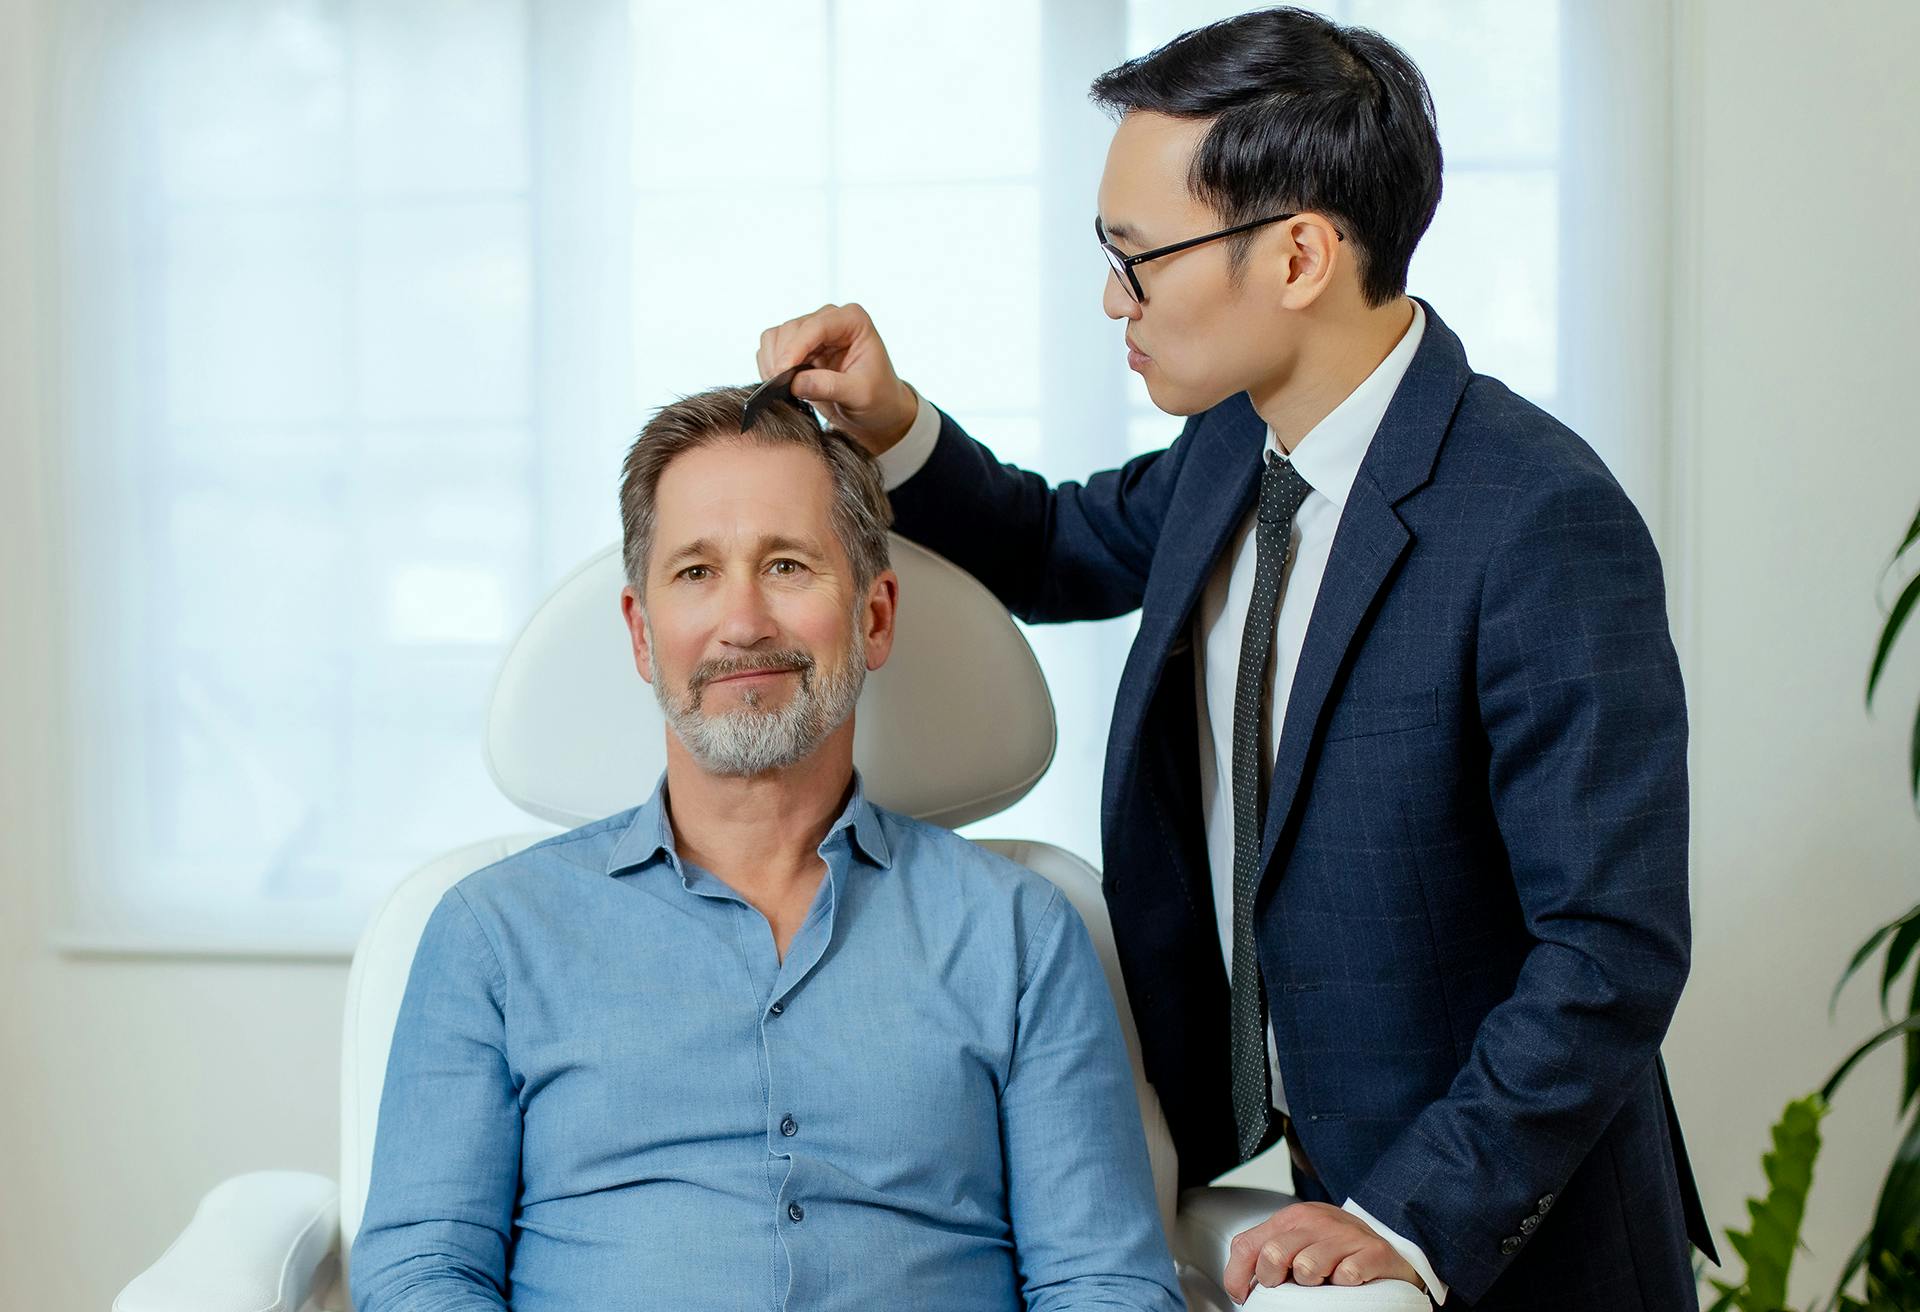 Dr. Timothy Ortlip Looking at a Male Patient's Hair